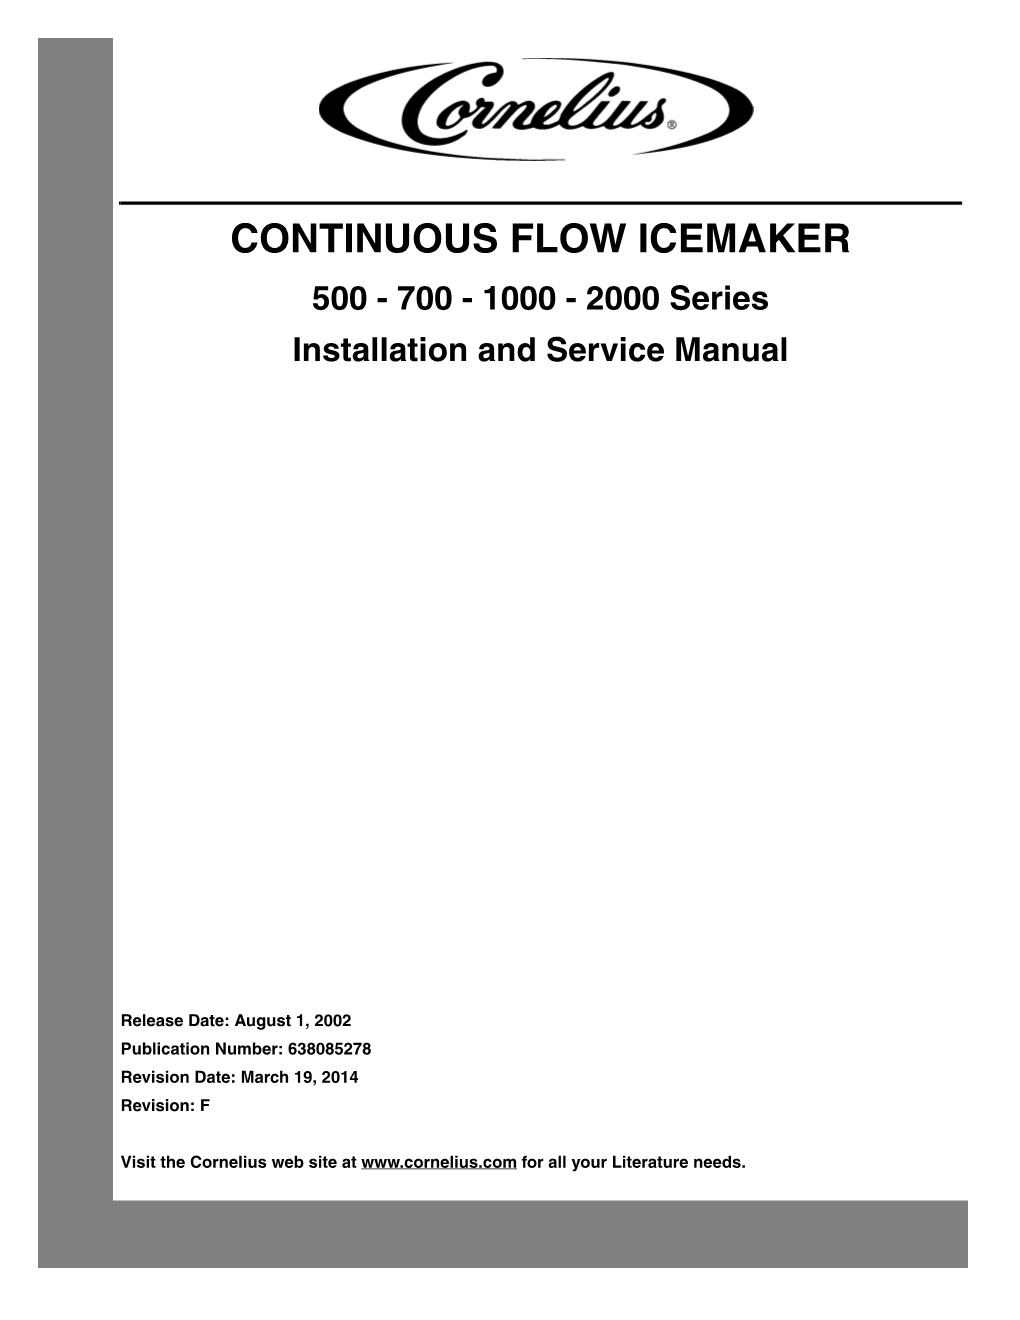 CONTINUOUS FLOW ICEMAKER 500 - 700 - 1000 - 2000 Series Installation and Service Manual